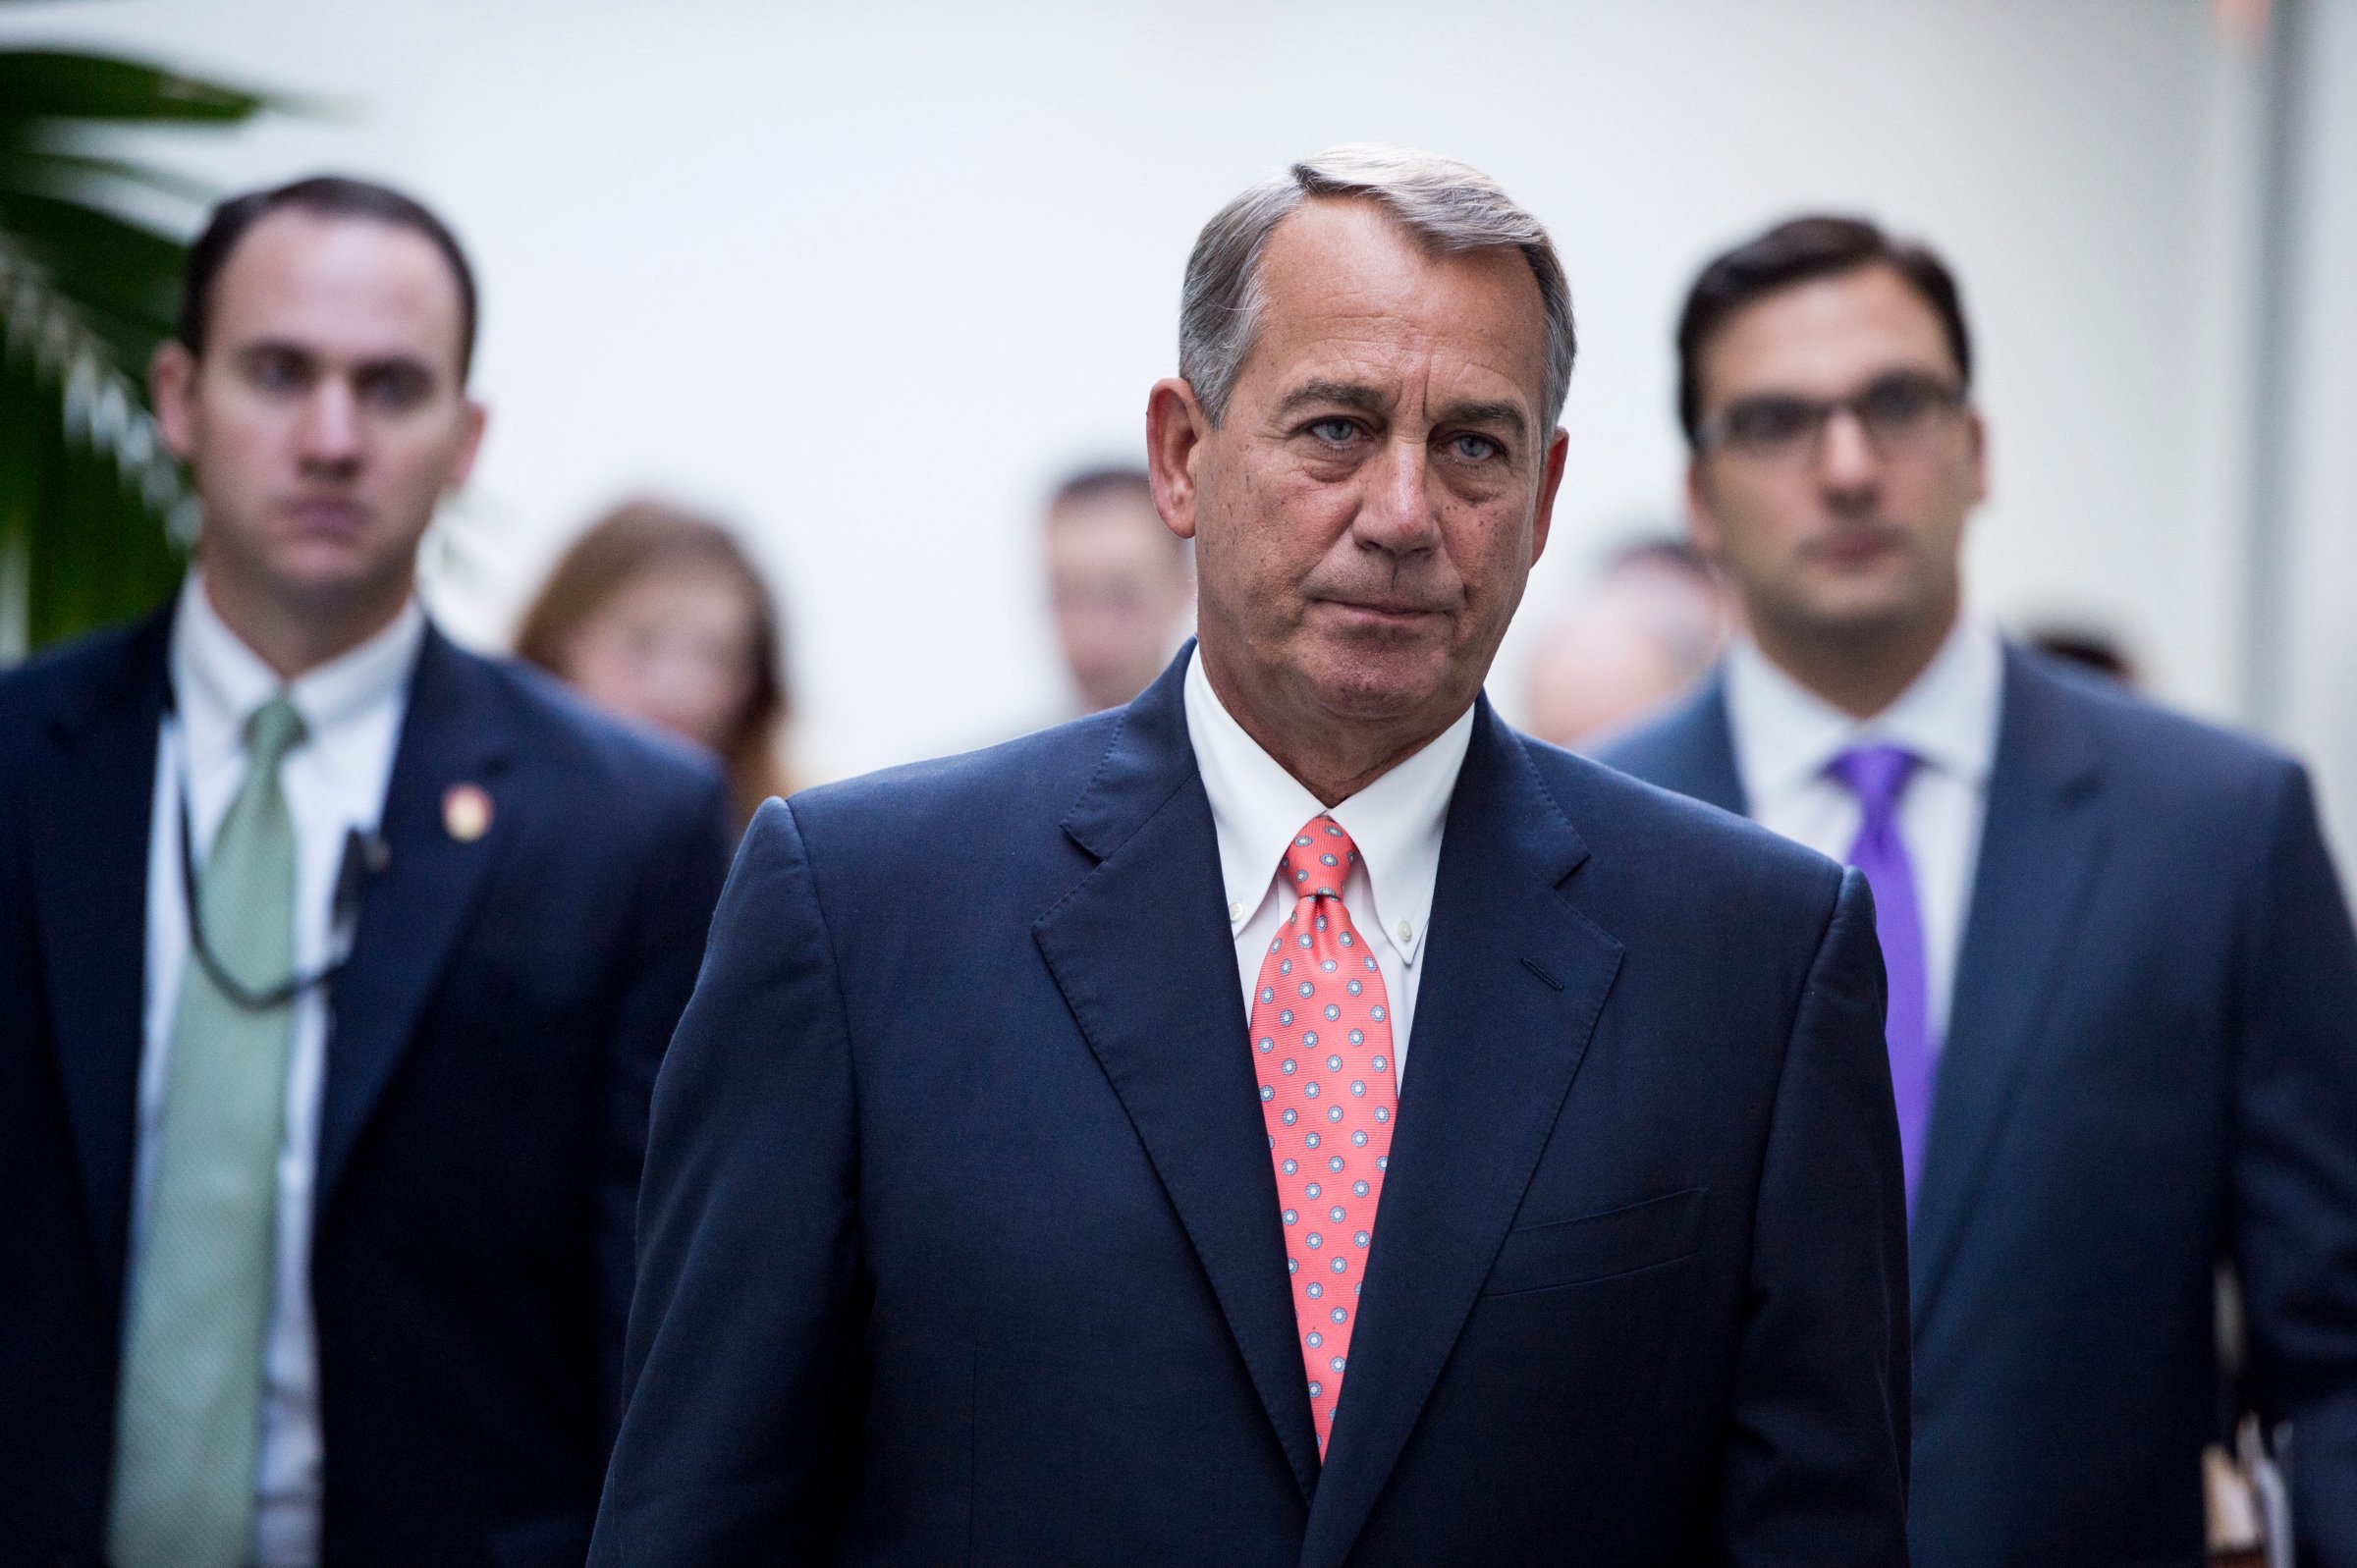 Speaker of the House John Boehner leaves the House Republican Conference meeting in the Capitol on Jan. 13, 2015.